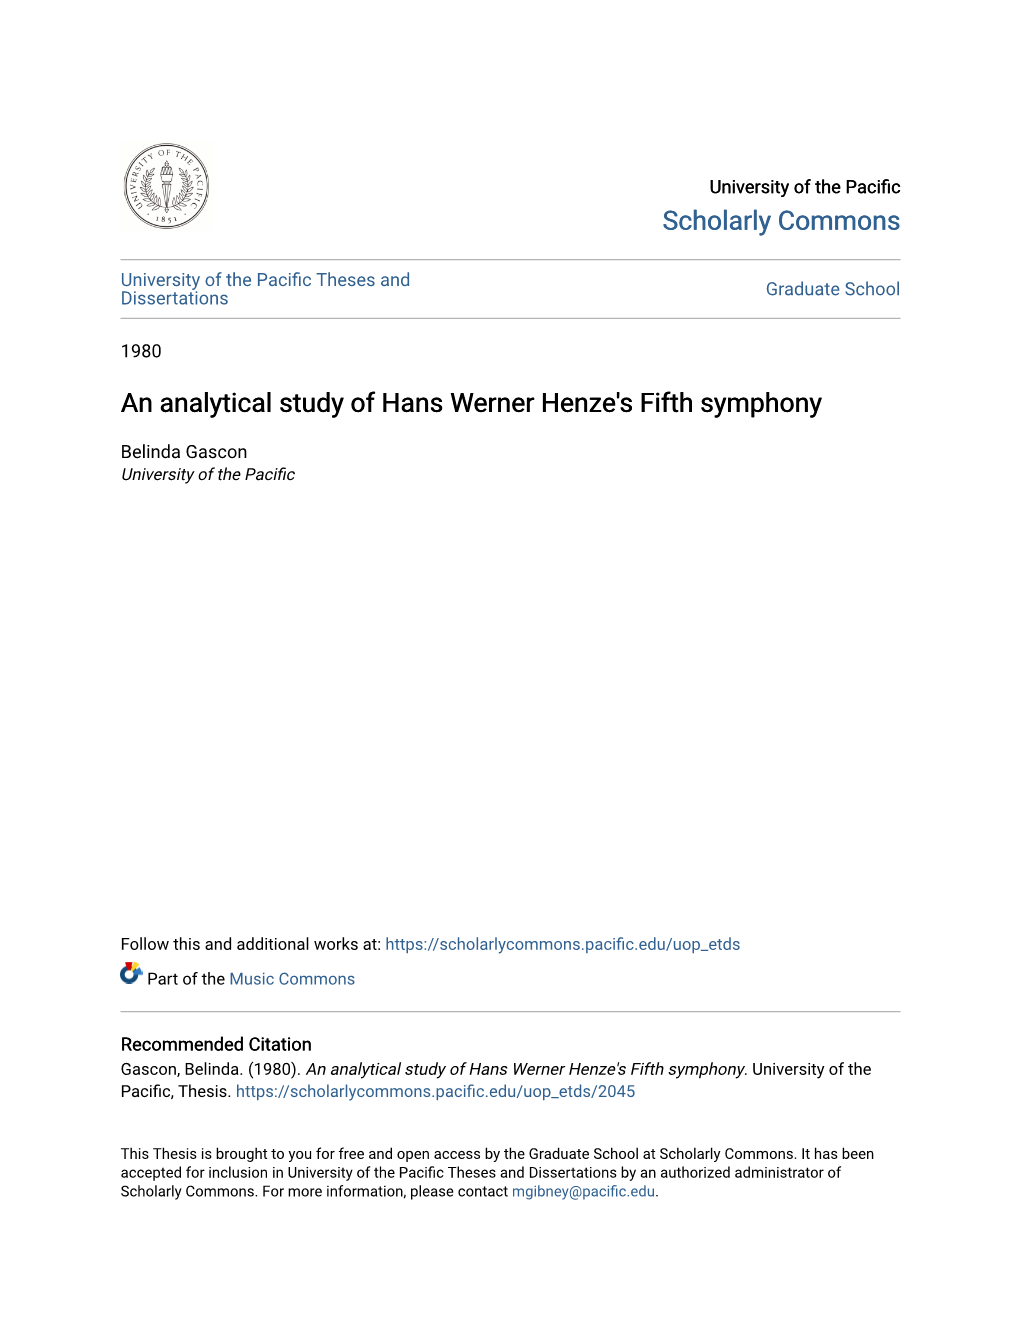 An Analytical Study of Hans Werner Henze's Fifth Symphony